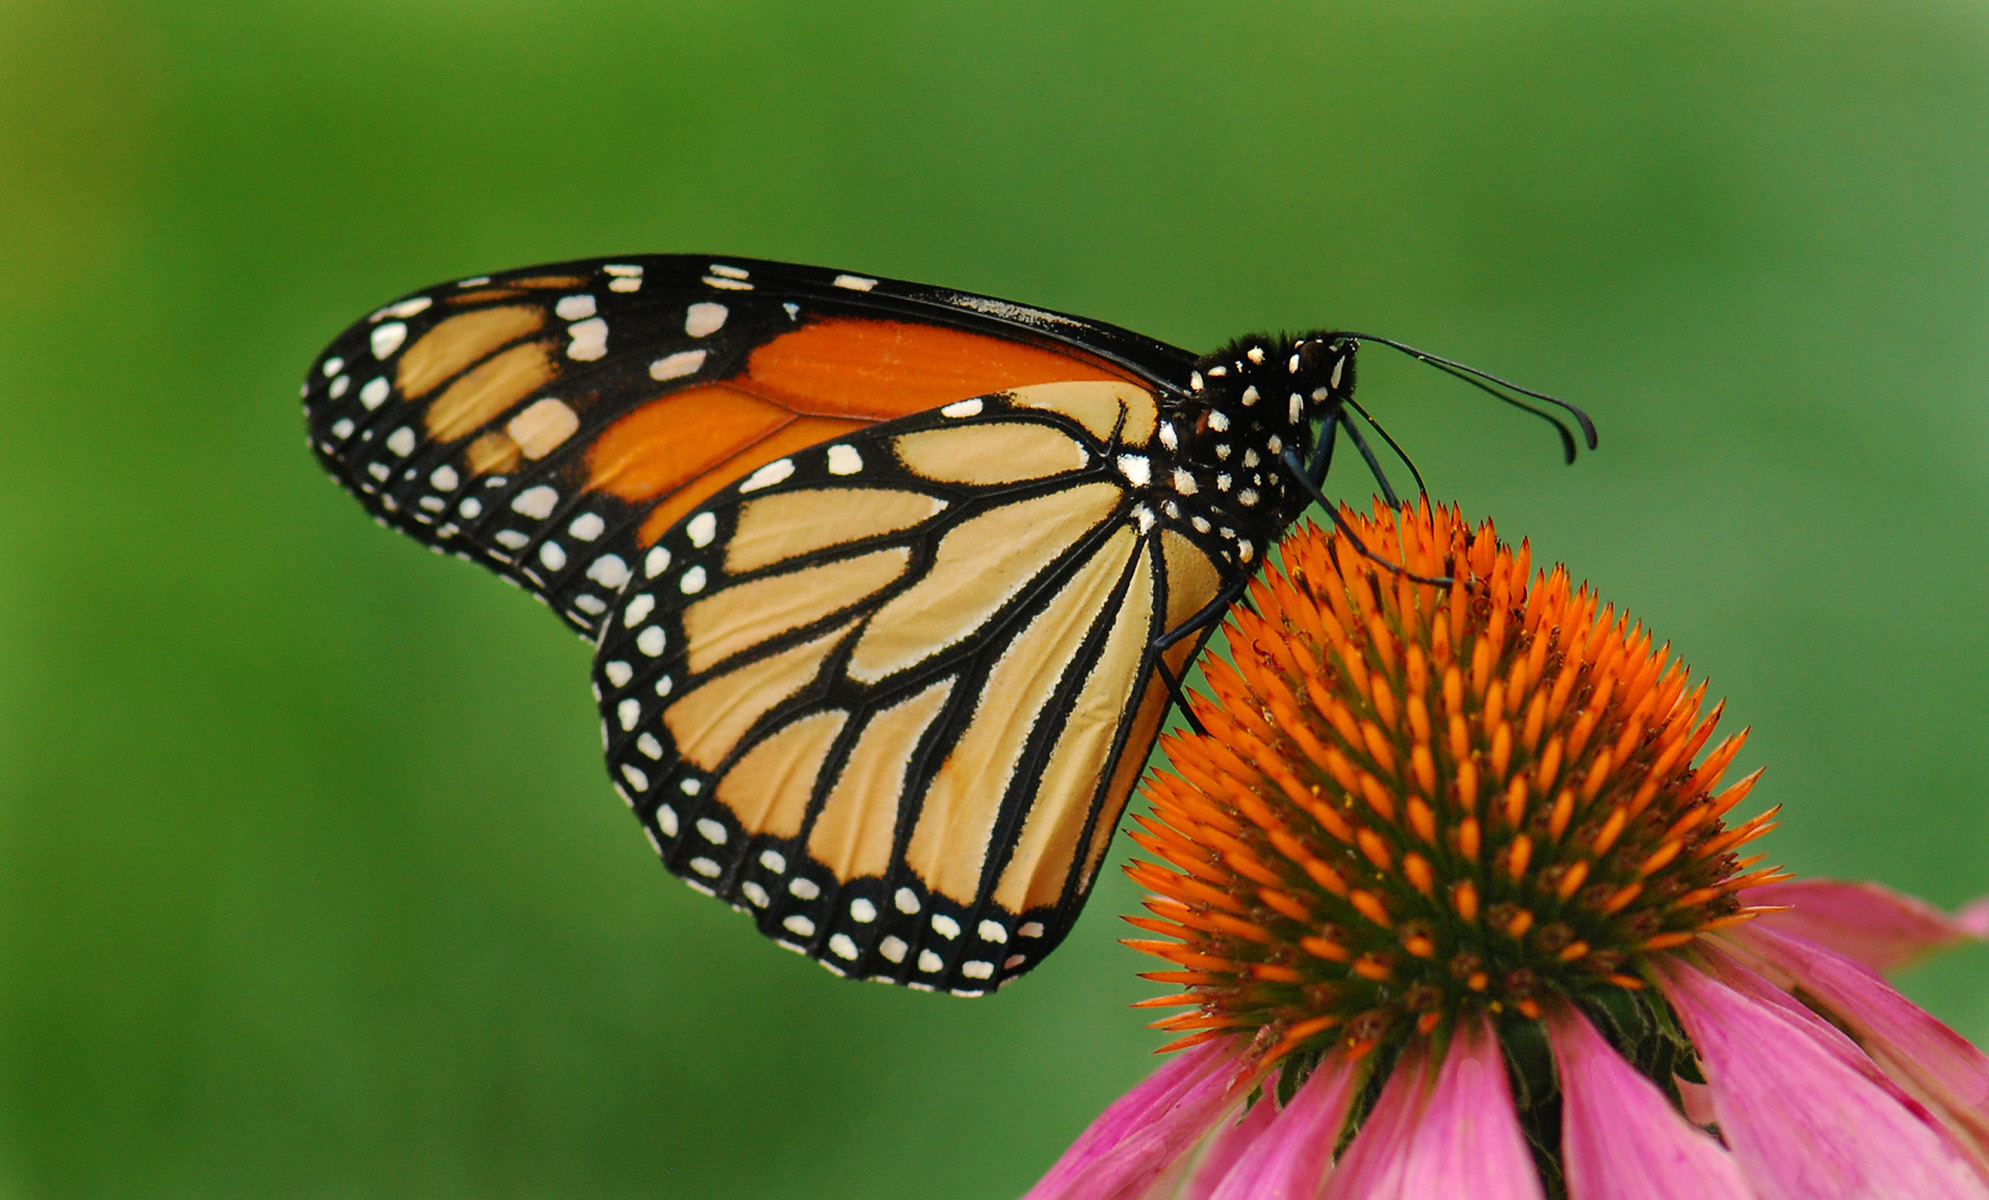 Texas Comptroller Announces Partnerships with Texas A&M, Sam Houston State University to Study Monarch Butterfly